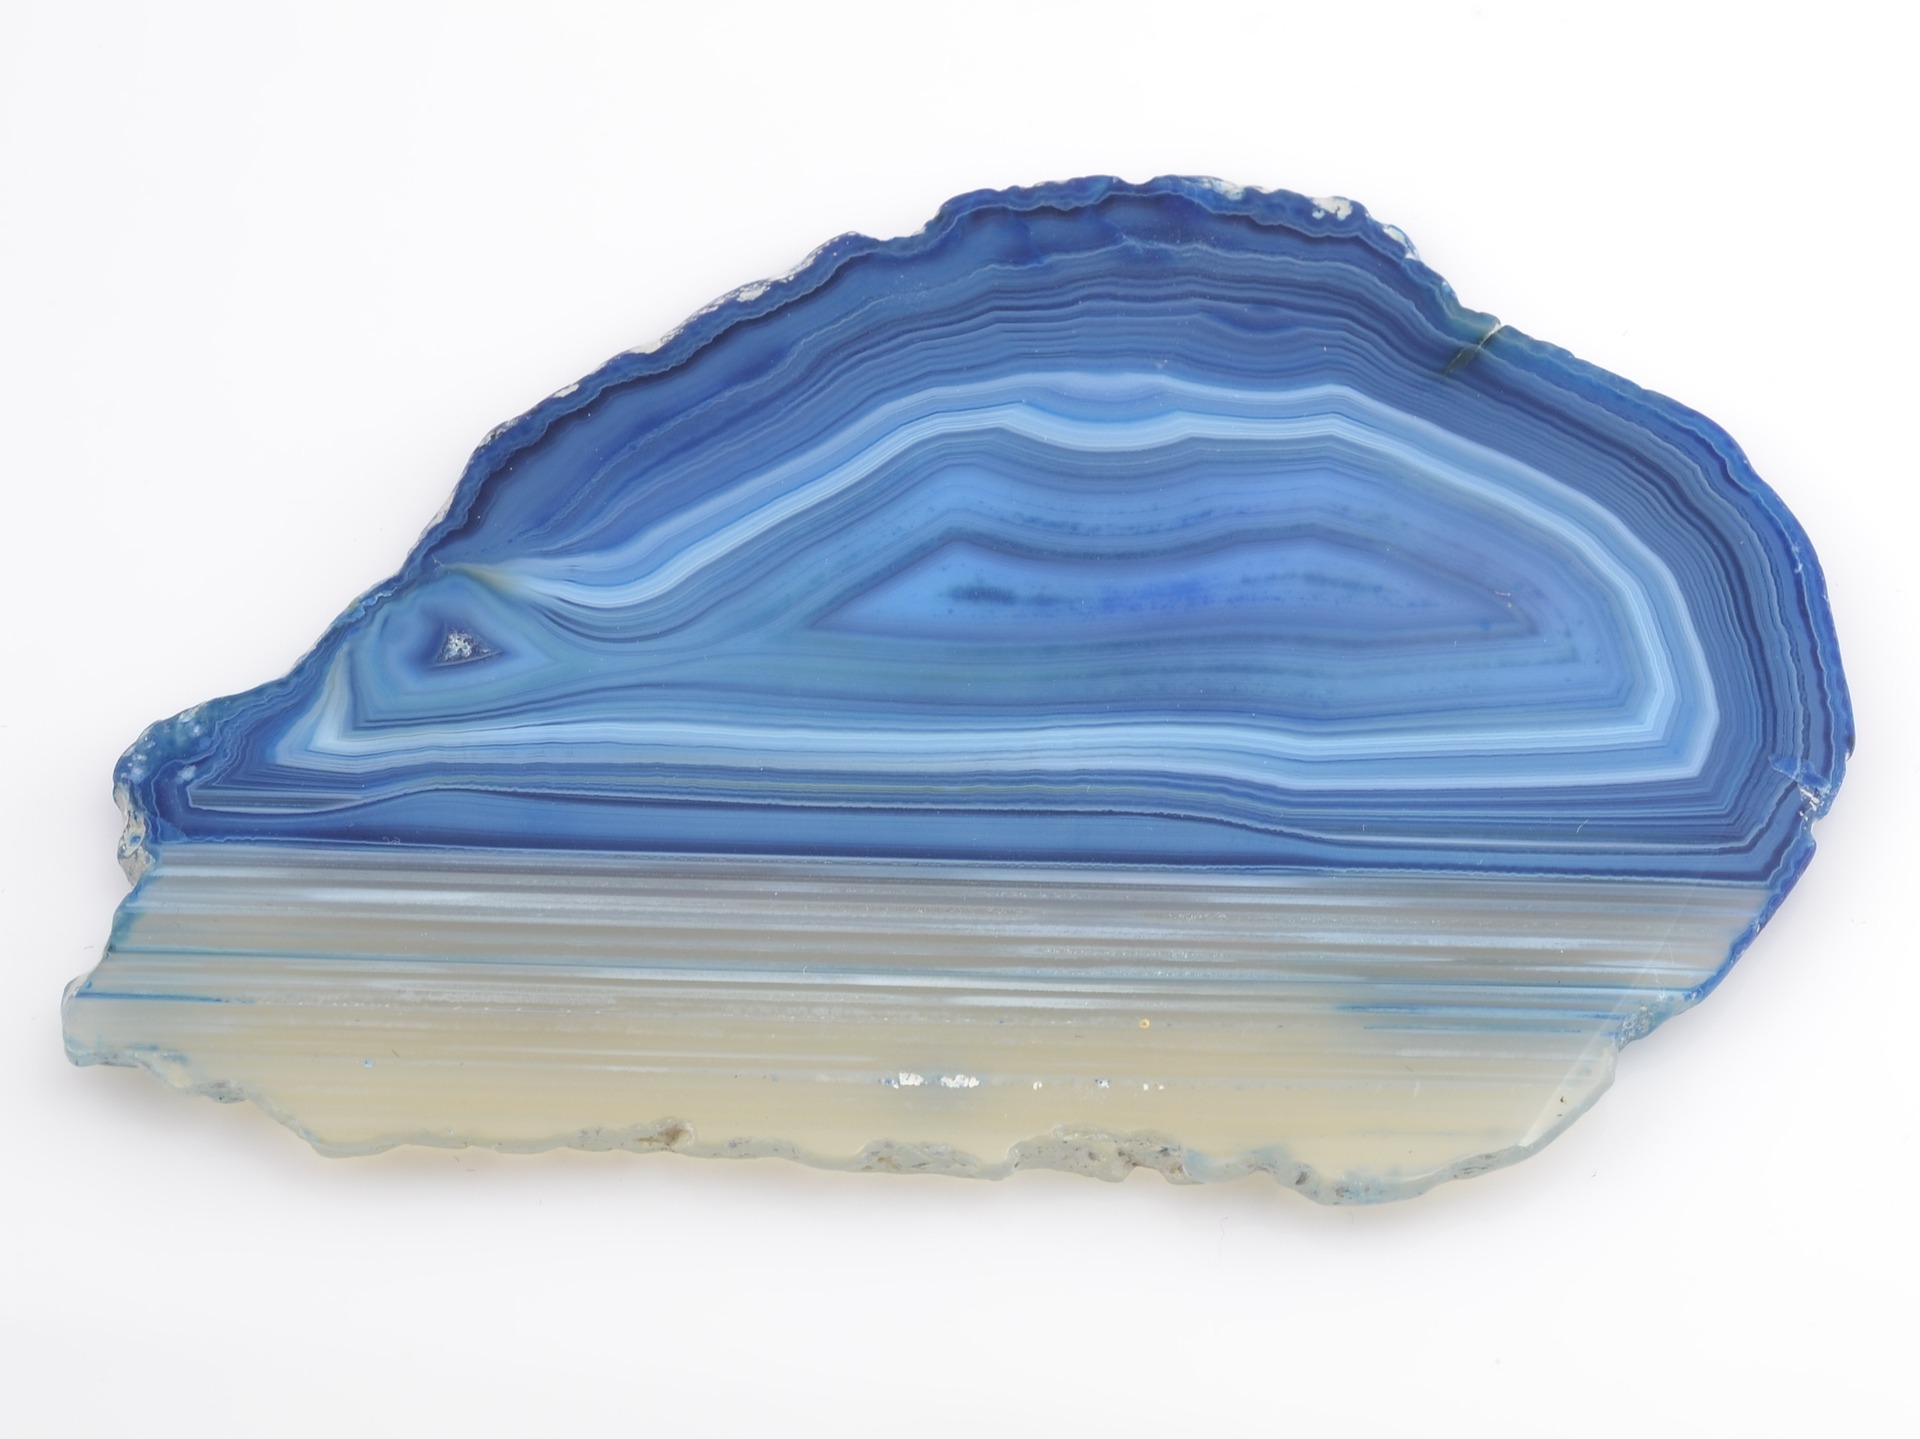 A blue lace agate crystal